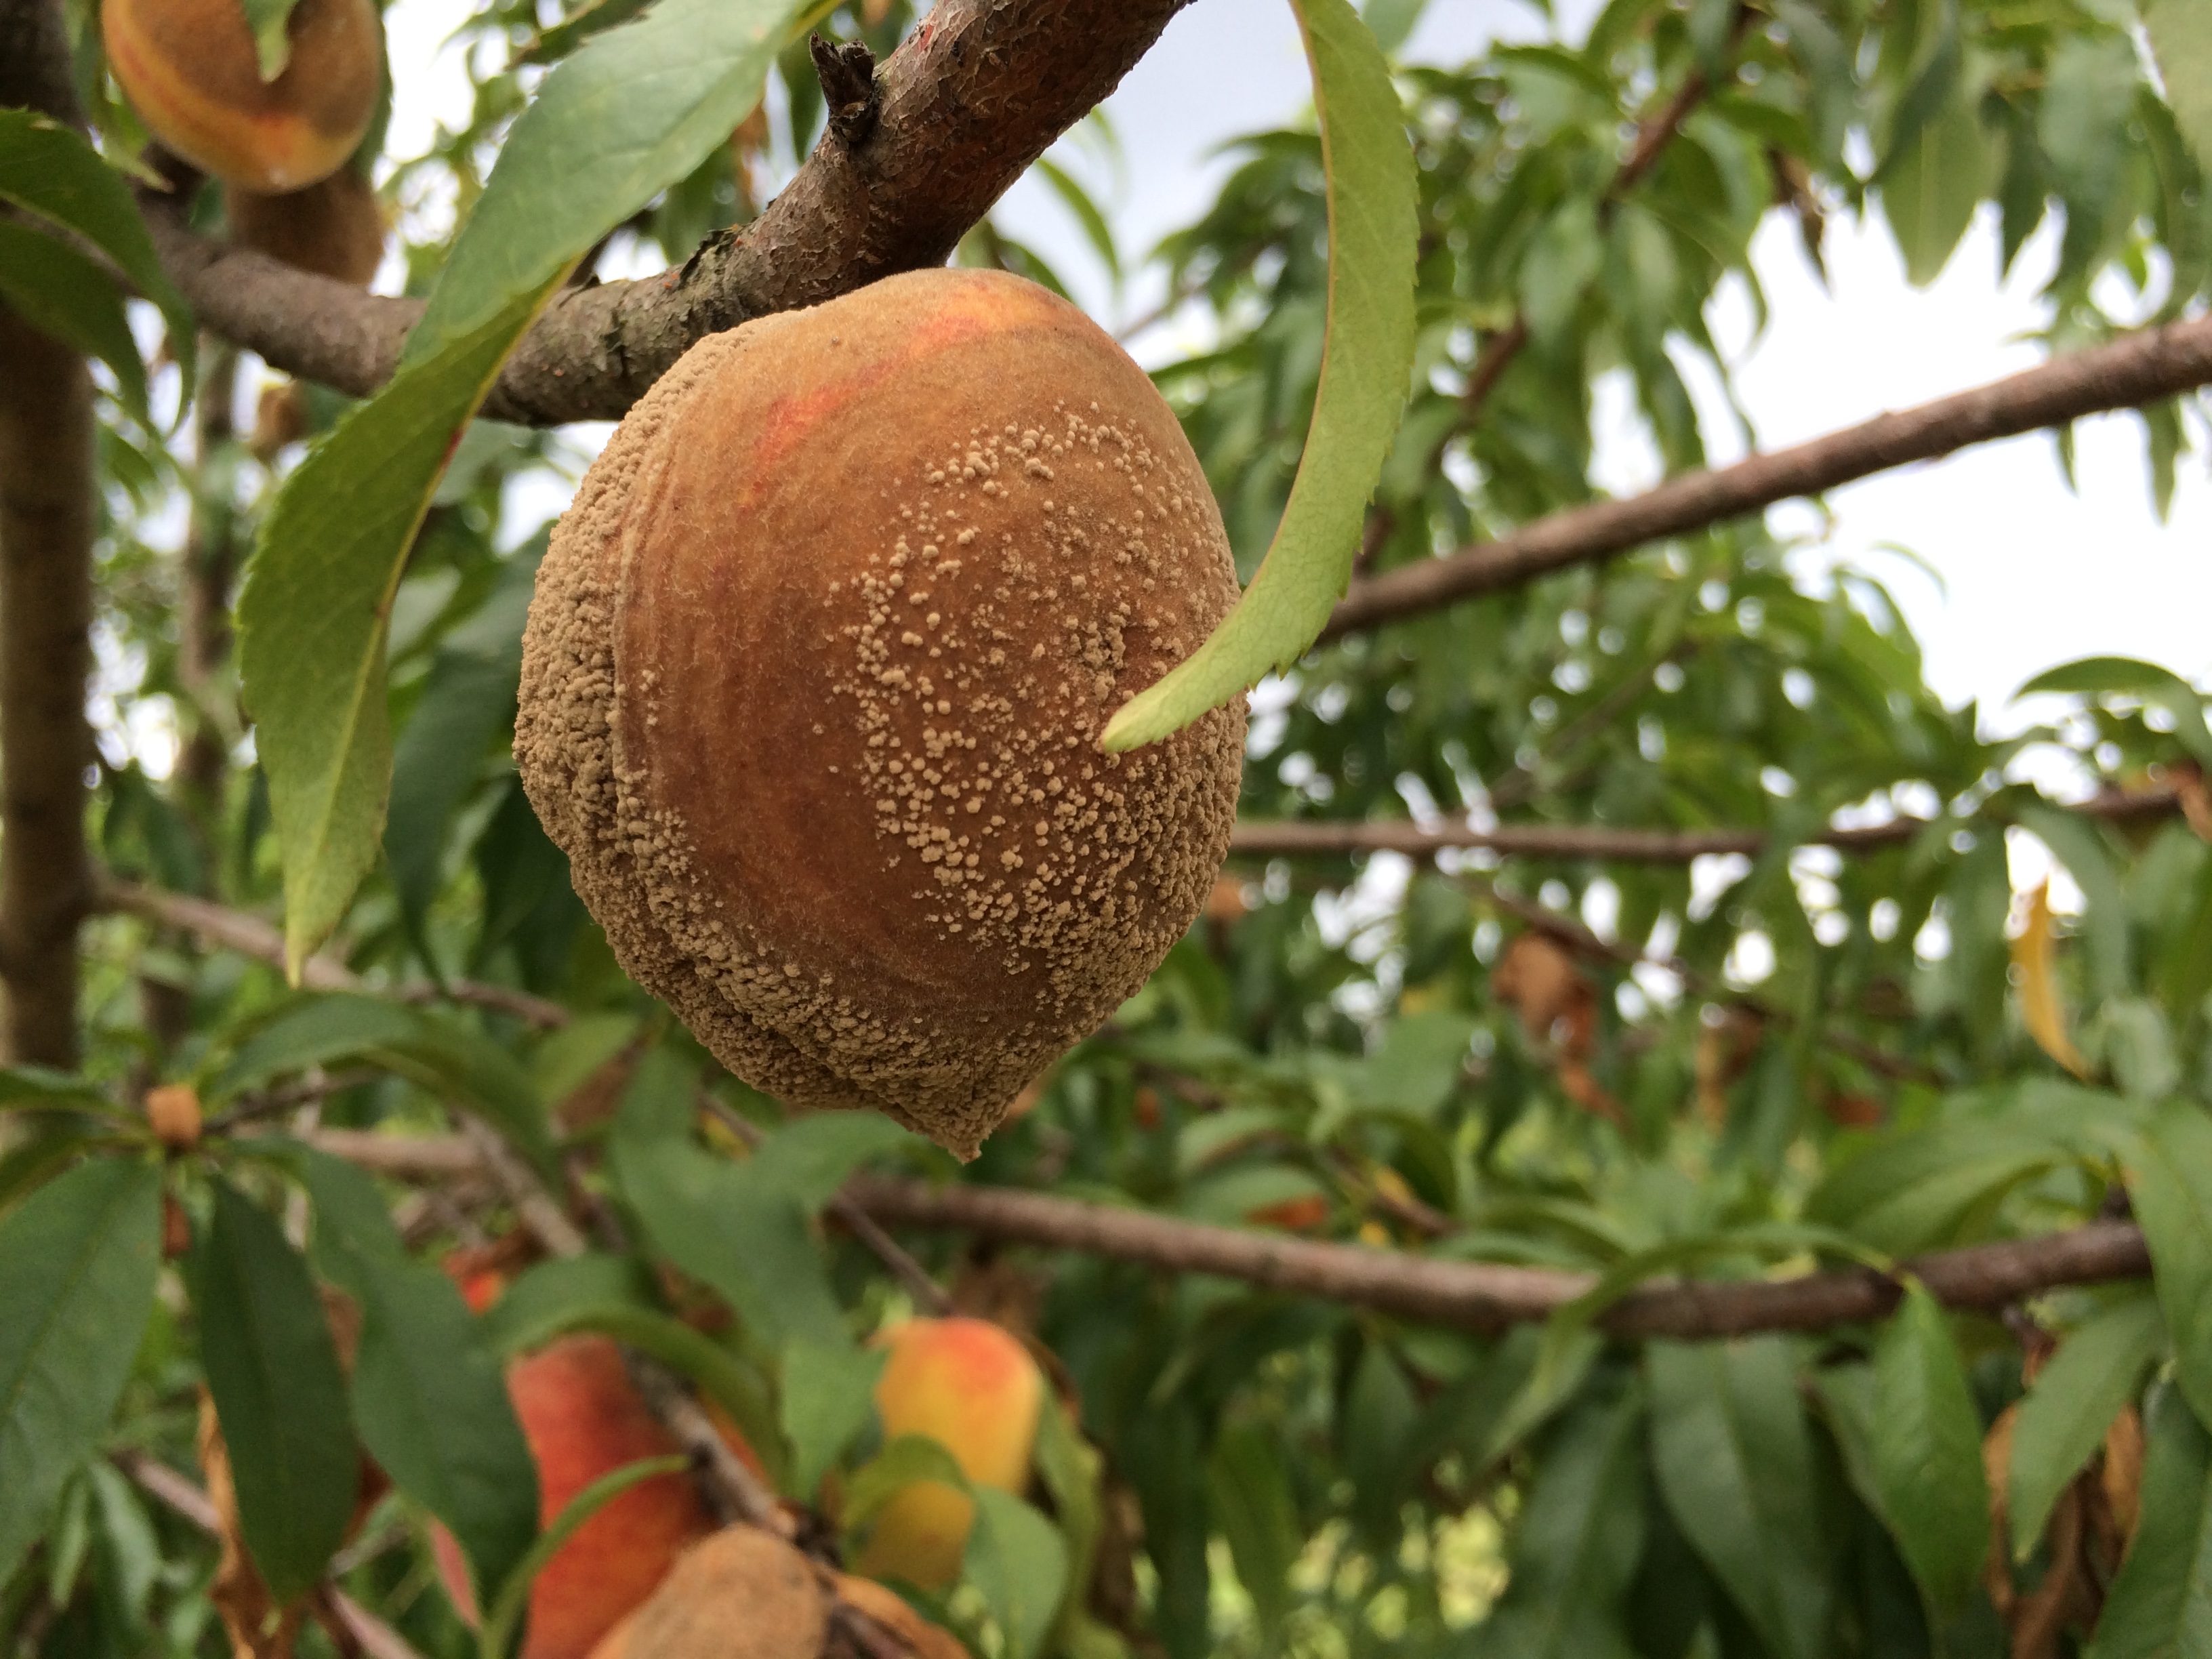 Symptoms and signs of brown rot on peach.